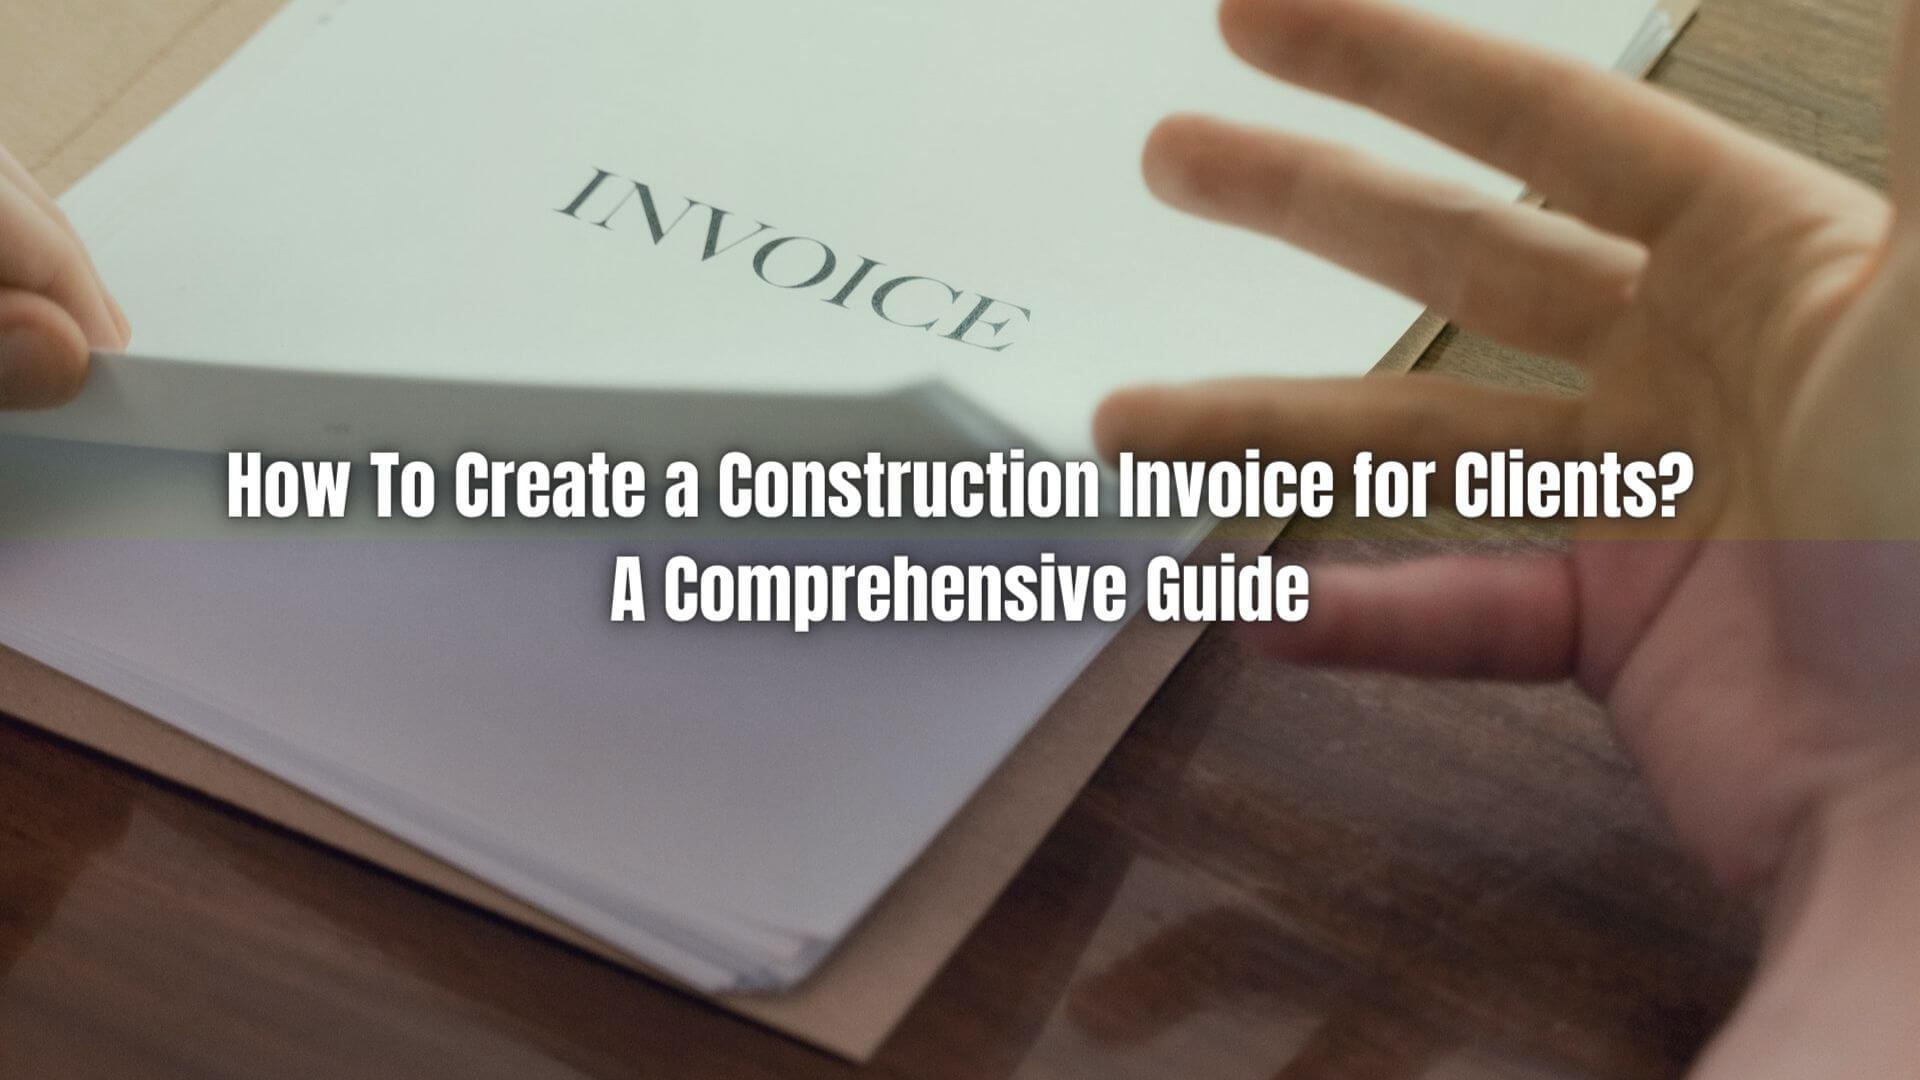 As someone running a construction business, you need to be organized and efficient when it comes to your invoice and billing. Learn how!